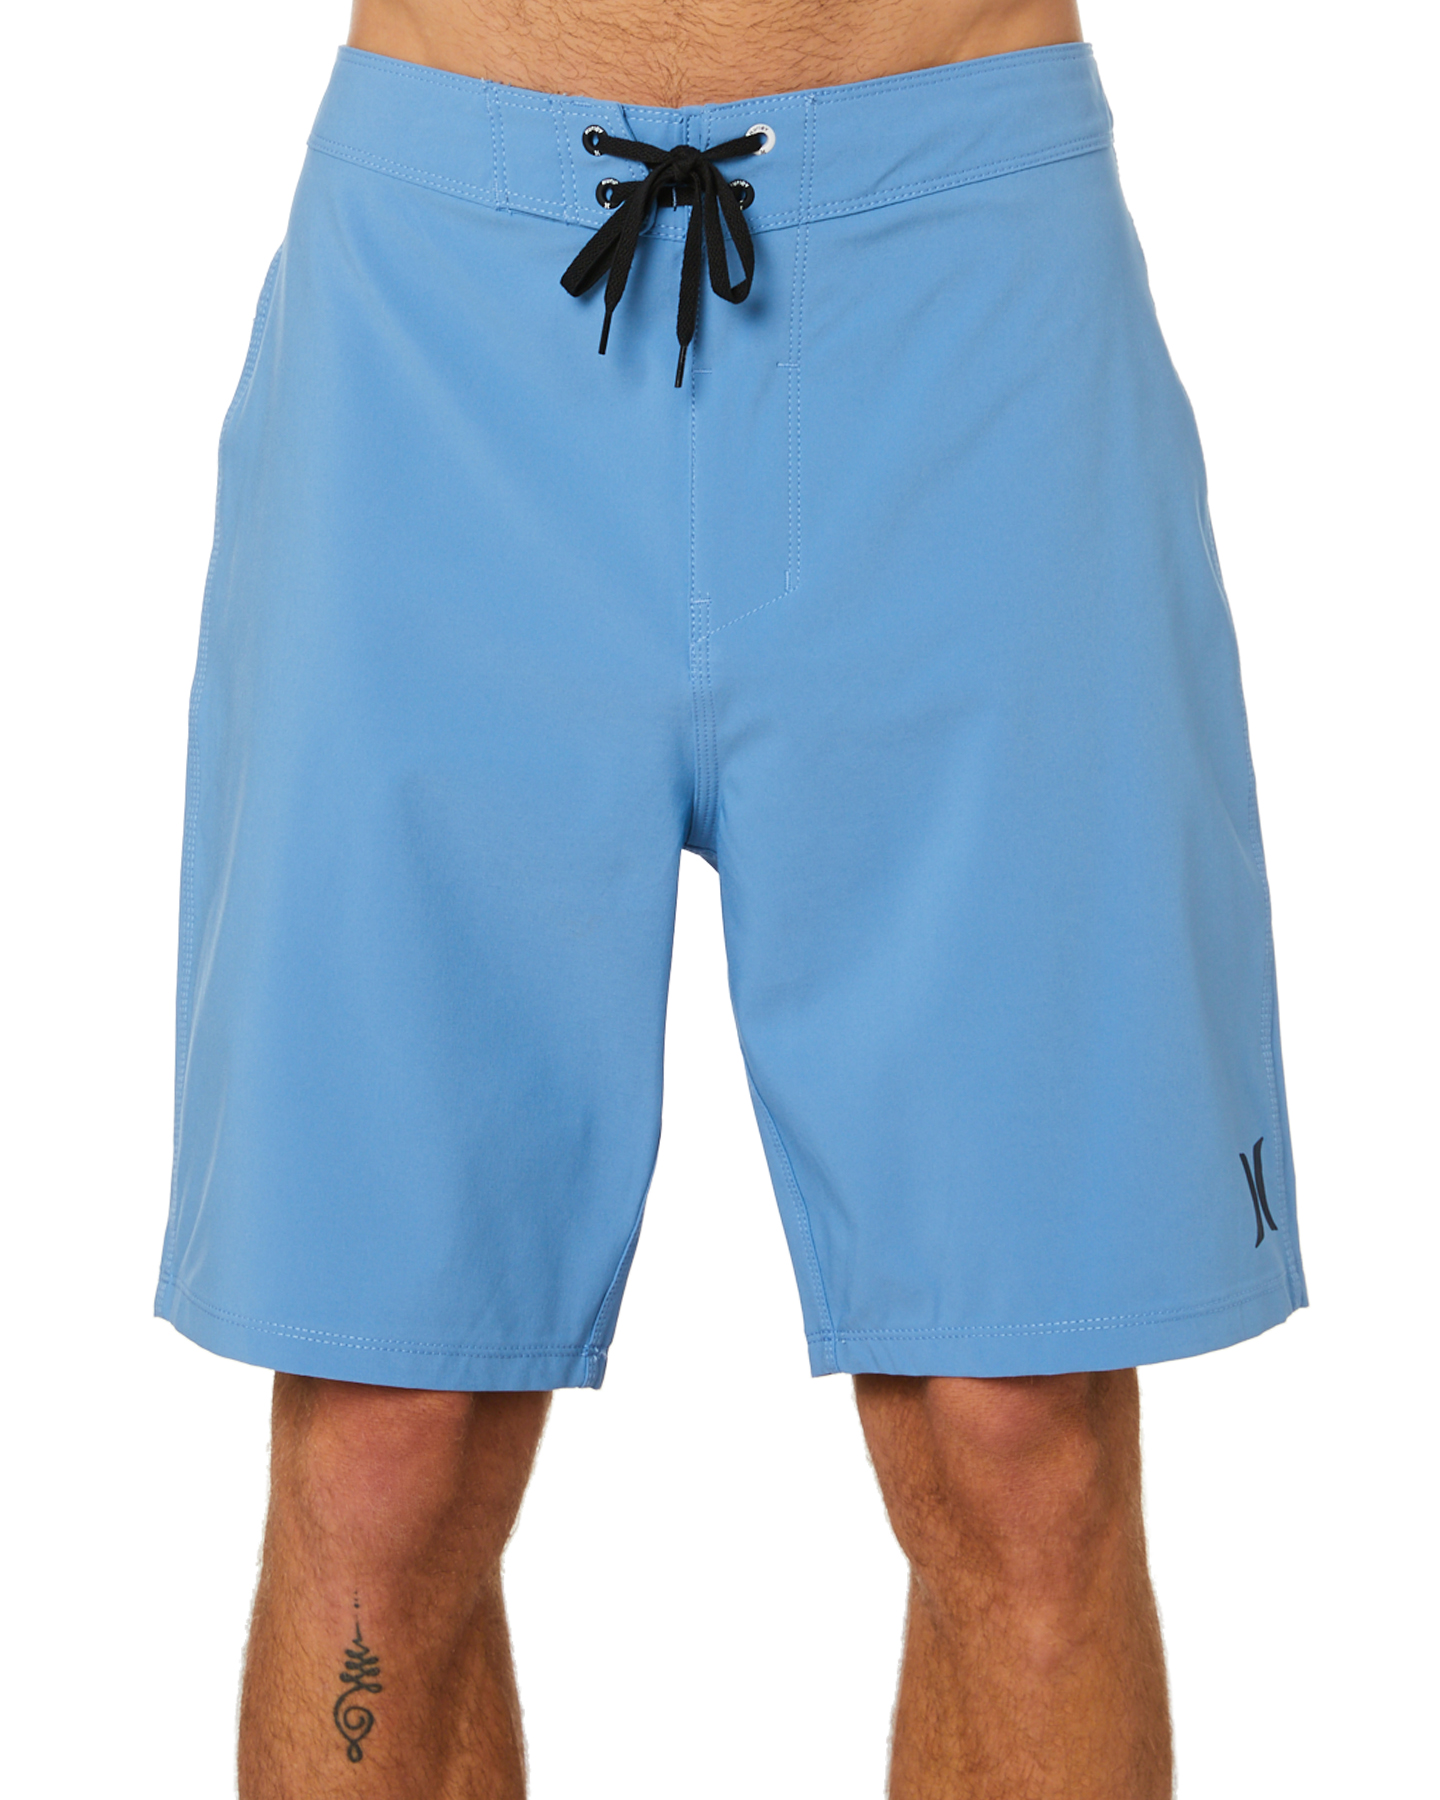 Hurley Phtm Oao Mens 20In Boardshort - Blue Beyond | SurfStitch